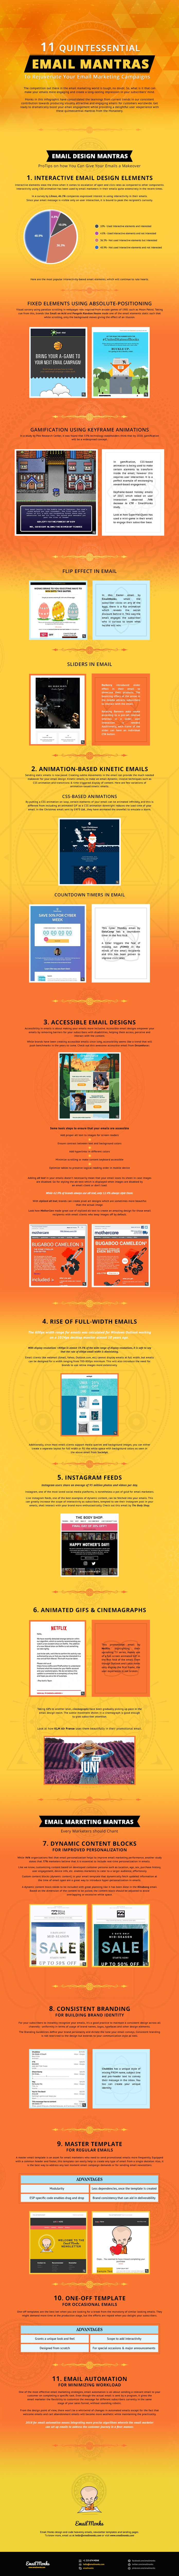 Email design and marketing mantras: click the link below for an accessible version.